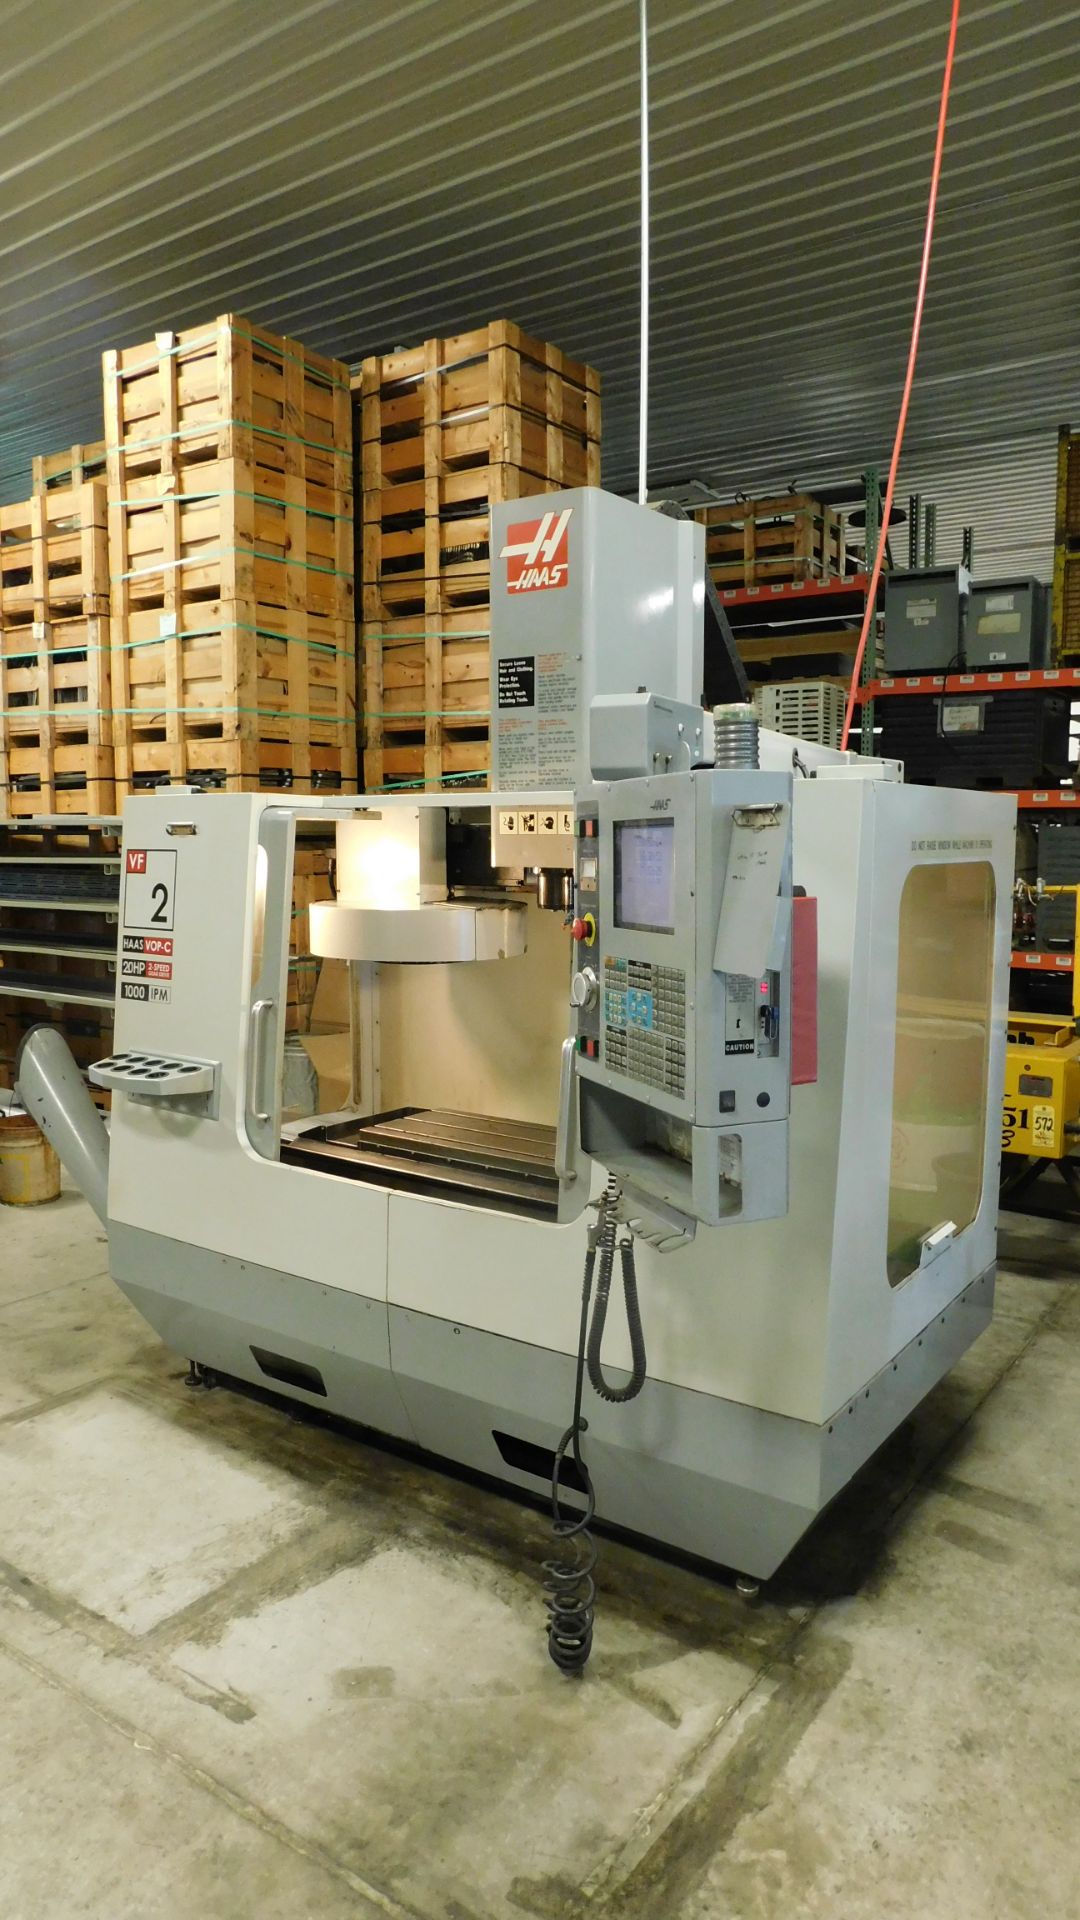 Haas VF-2 CNC Vertical Machining Center, s/n 36138, New 2004, Haas CNC Control, 4th Axis Ready, - Image 4 of 14